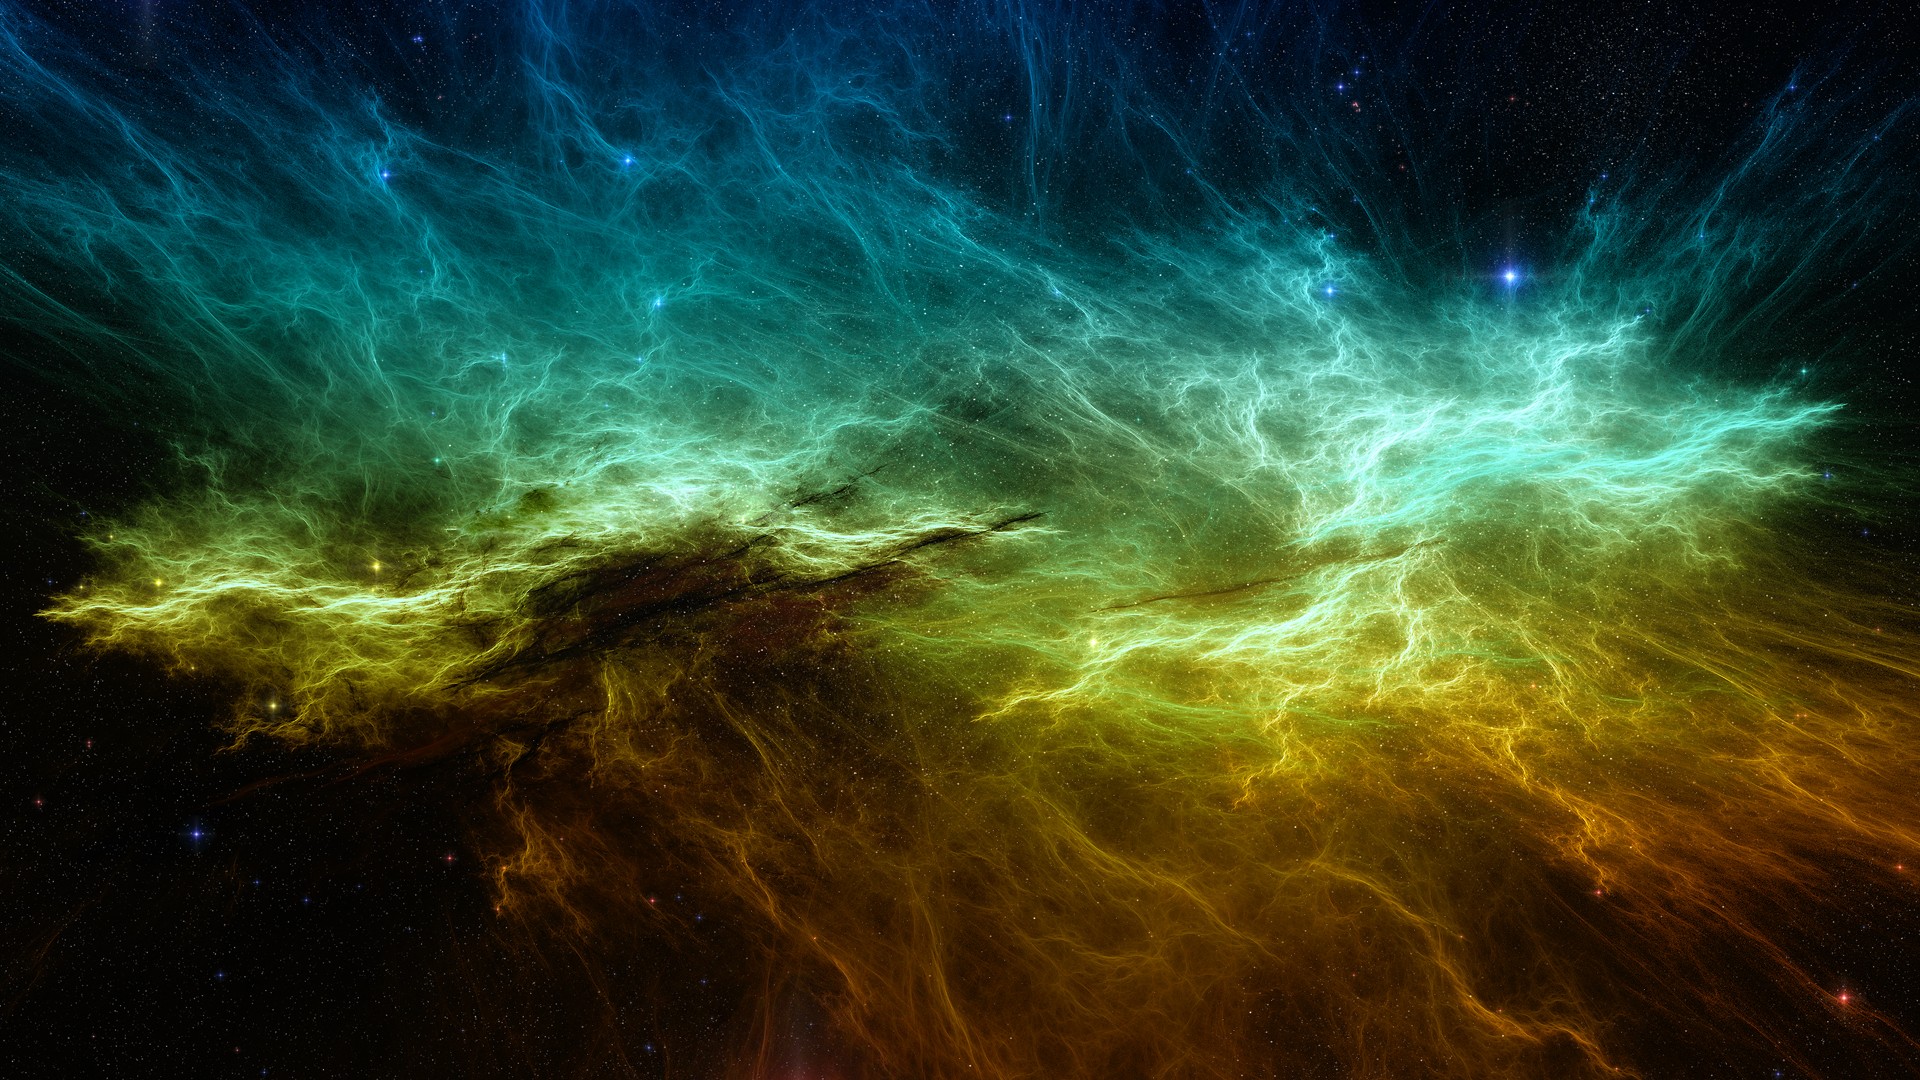 Desktop Abstract Nebula And Make This Wallpaper For Your